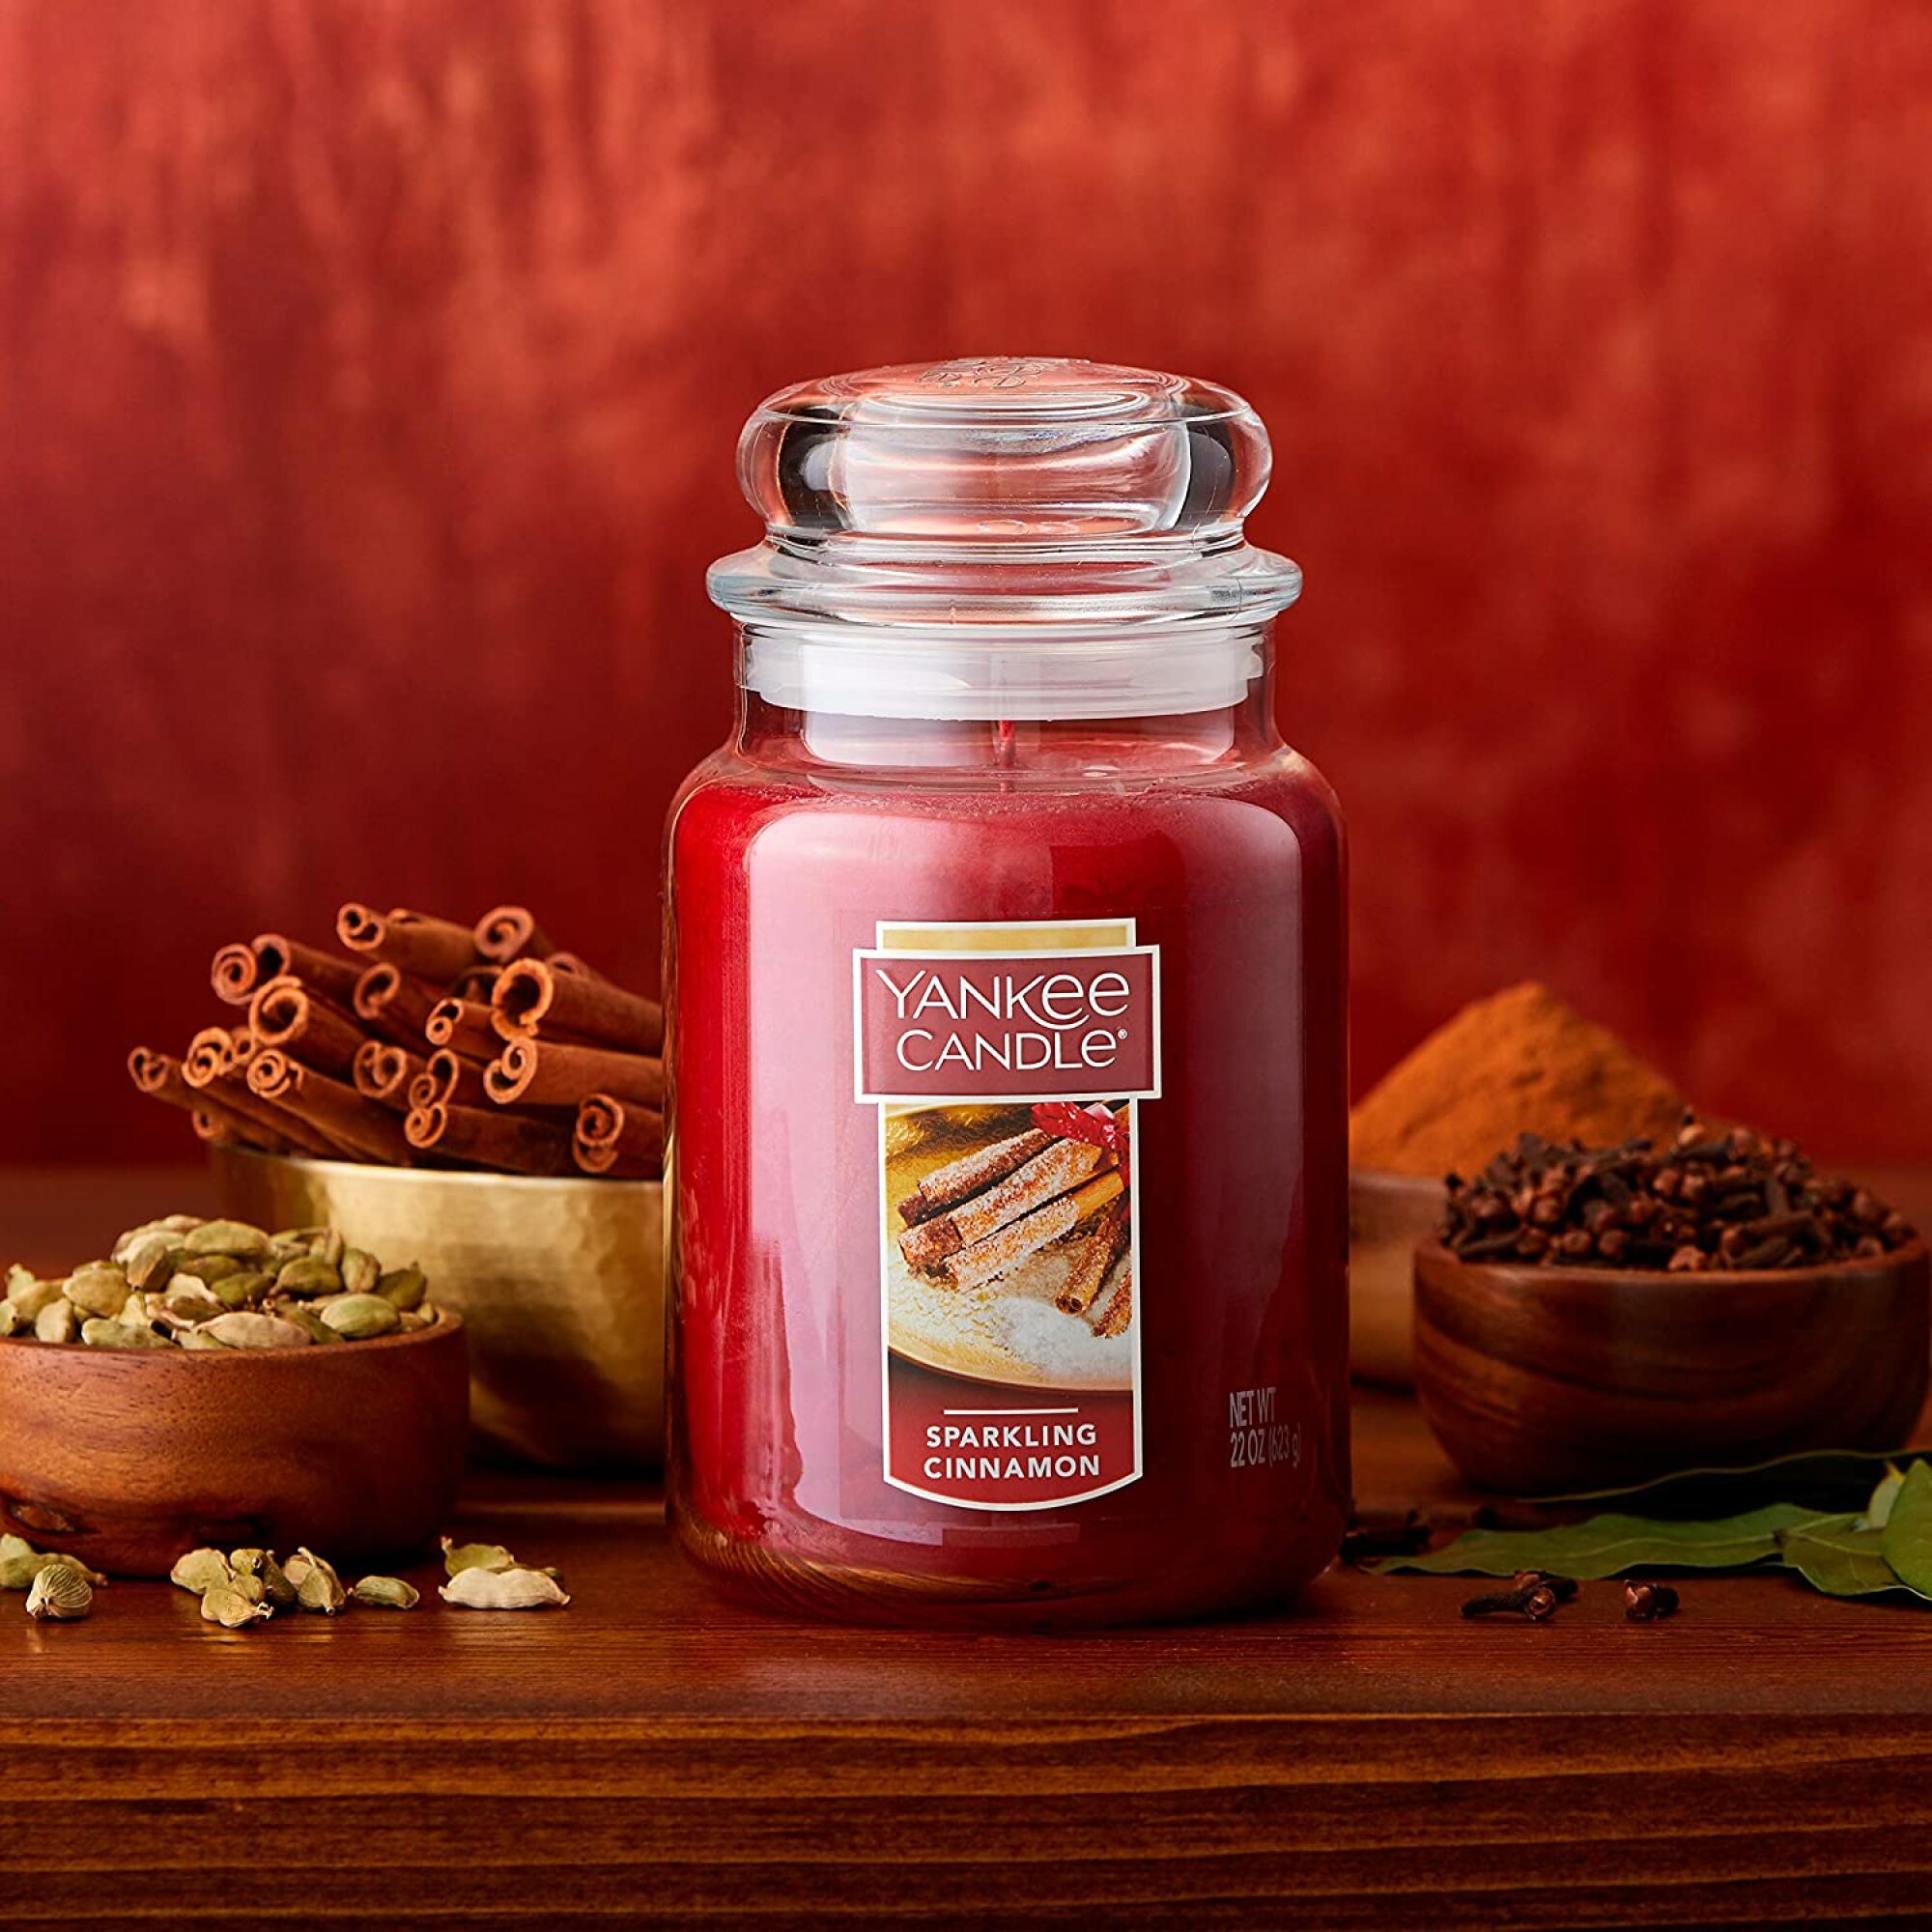 Yankee Candle Large Jar Candle (22 ounces), Sparkling Cinnamon on a red background.